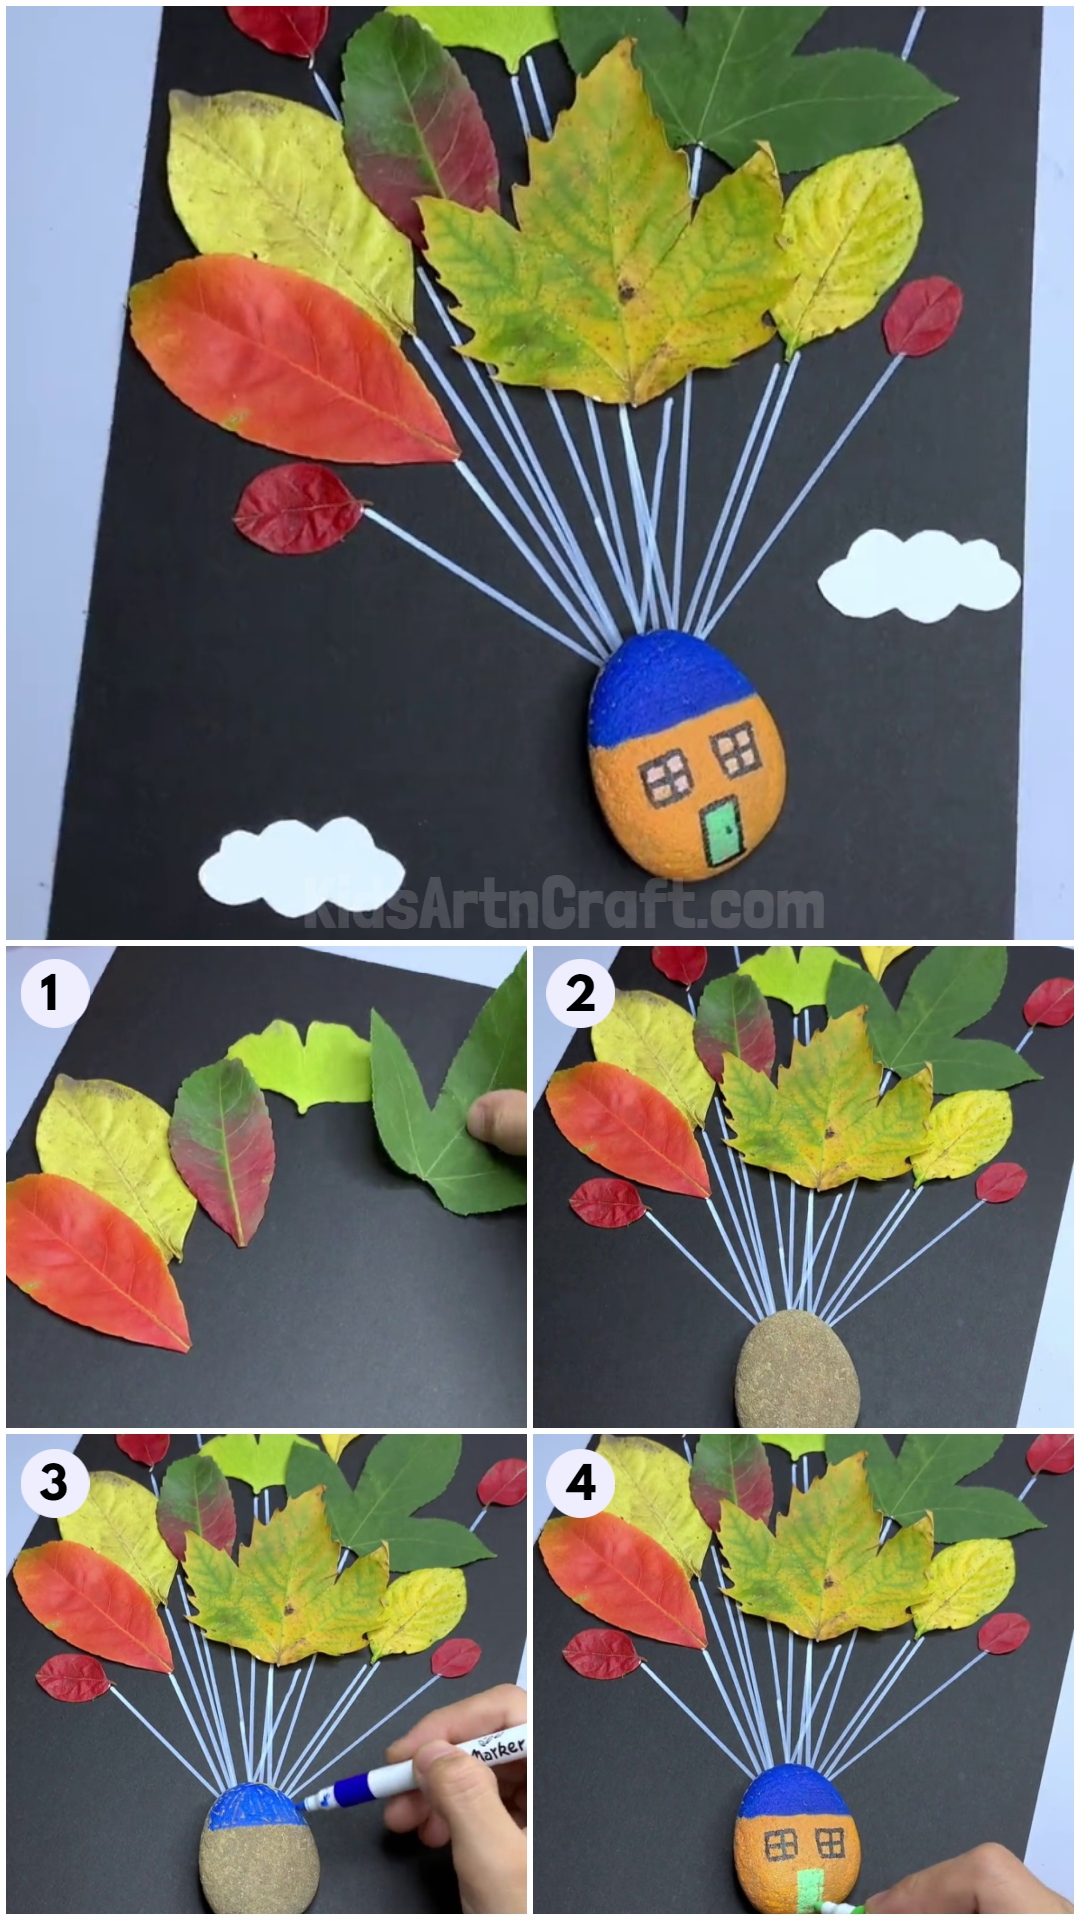 DIY Flying House Using Leaves step by step Tutorial - DIY Soaring Home Craft Produced Using Fall Leaves